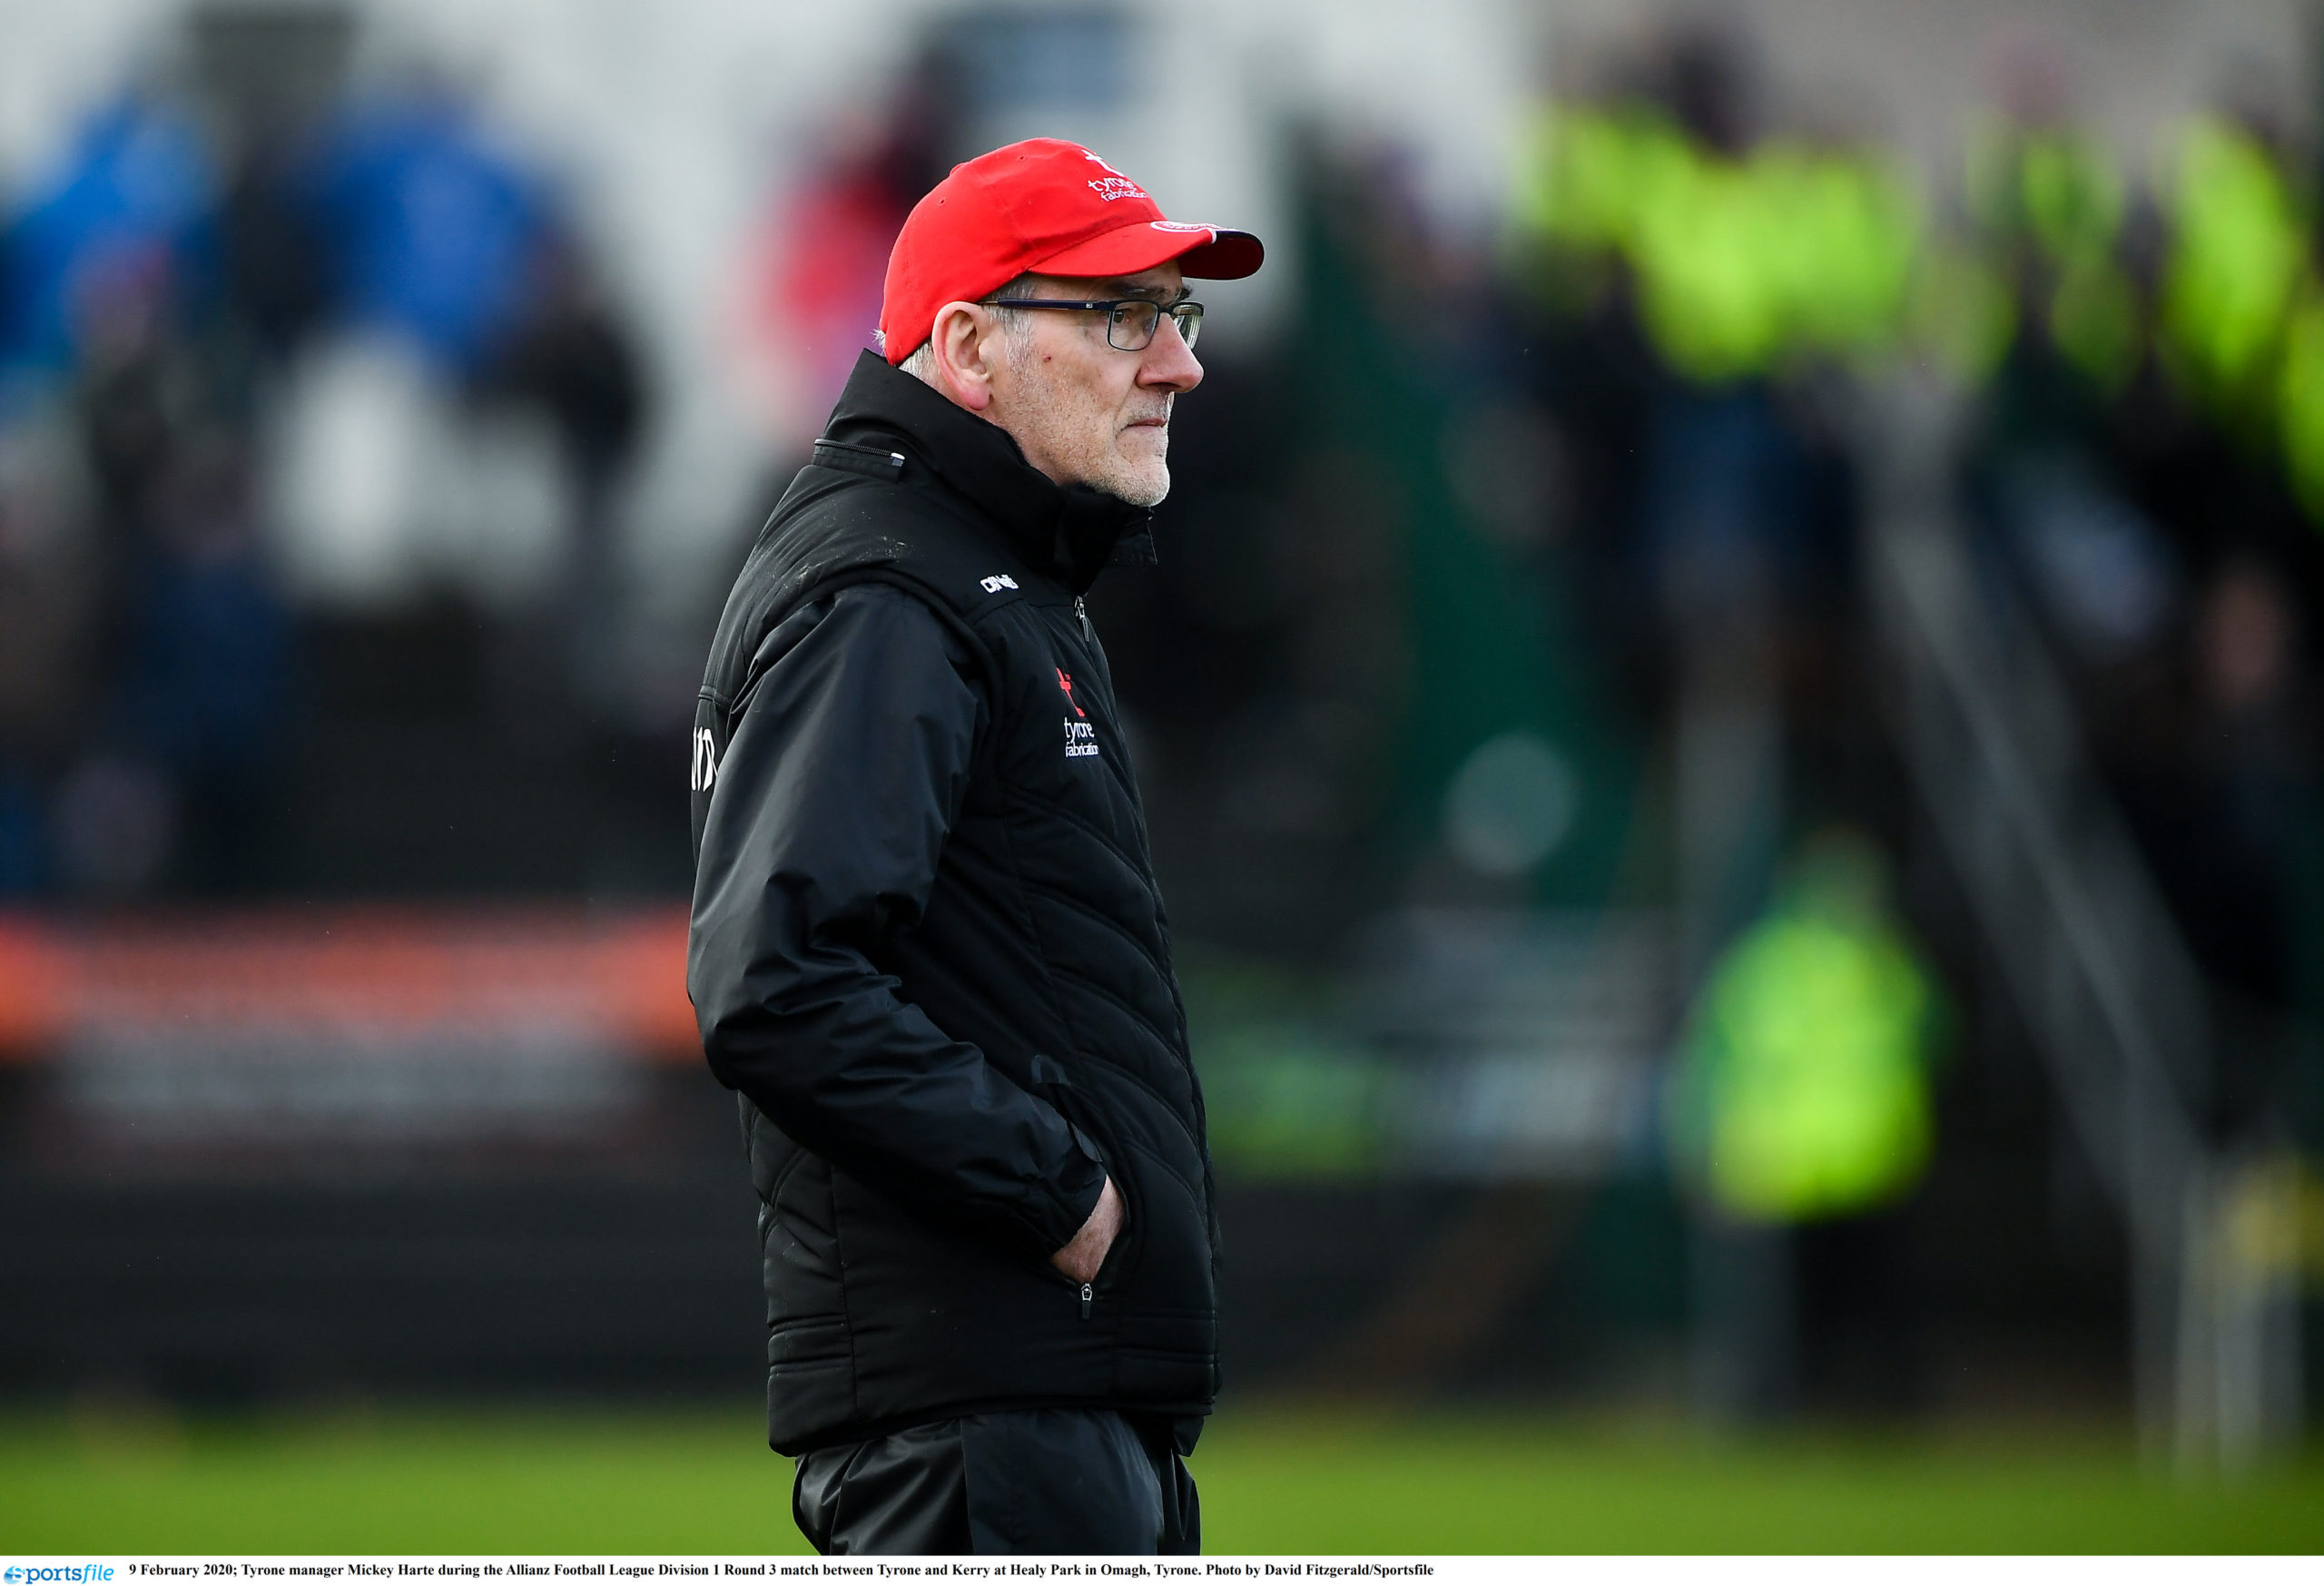 Harte’s request for one-year extension turned down